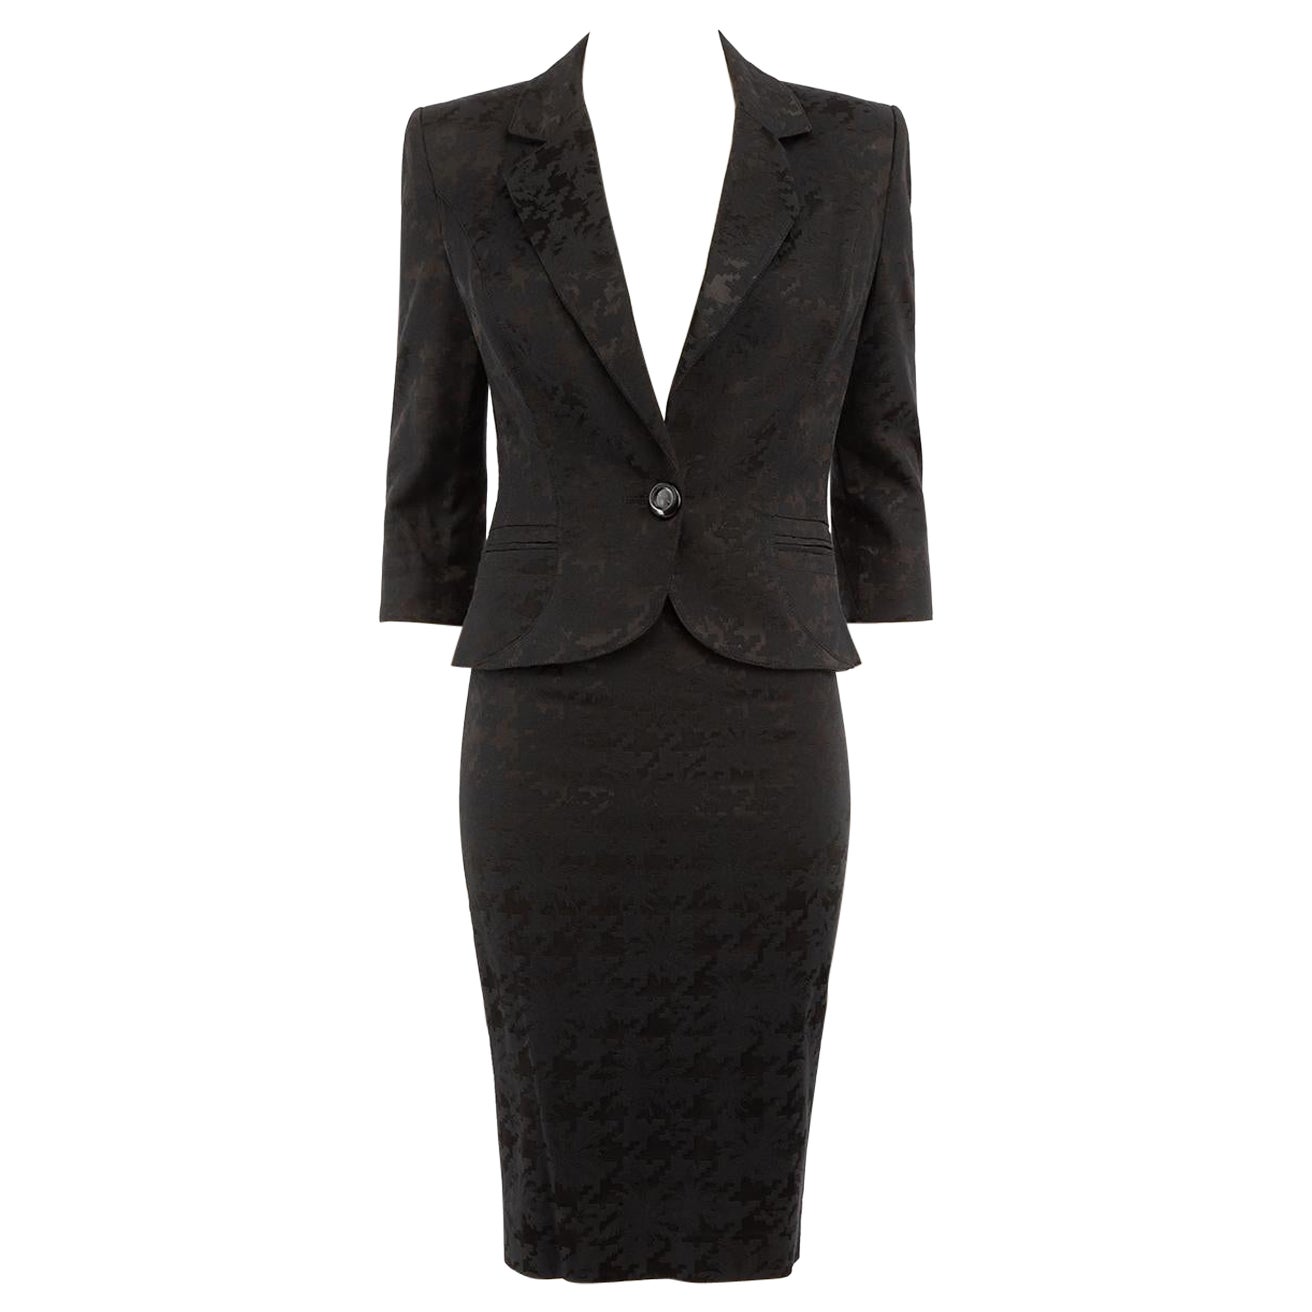 Roberto Cavalli Just Cavalli Black Houndstooth Skirt Suit Size S For Sale